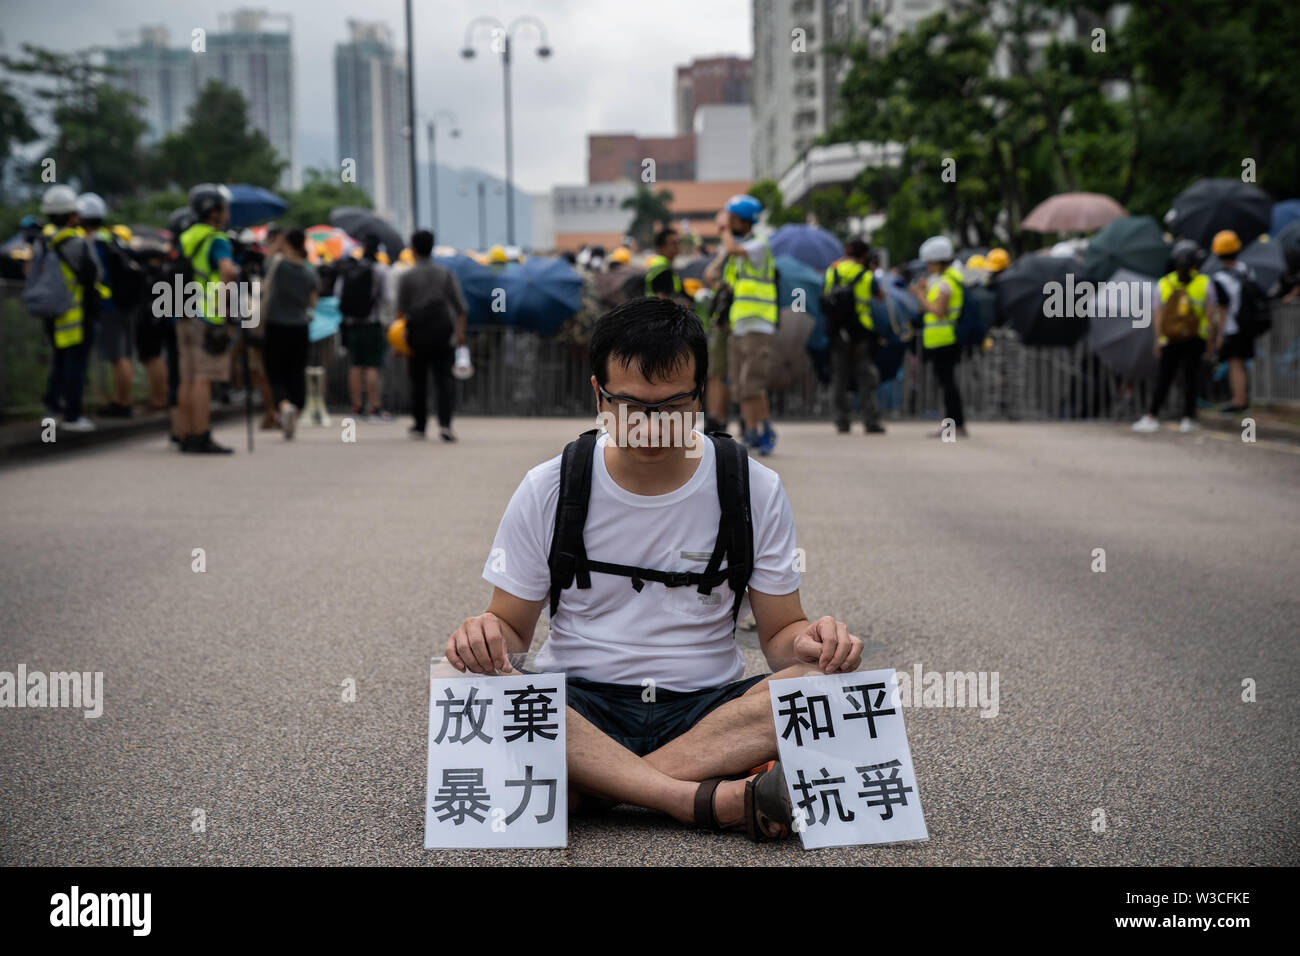 A demonstrator sits in between the protesters and the police during the protest.Thousands of pro democracy demonstrators took to the street once again in a new wave of anti government demonstrations which sparked by the extradition bill that the Hong Kong government was trying to push forward in June 2019.Police has made at least 30 arrests as protesters clashed with the riot police in the evening. Stock Photo